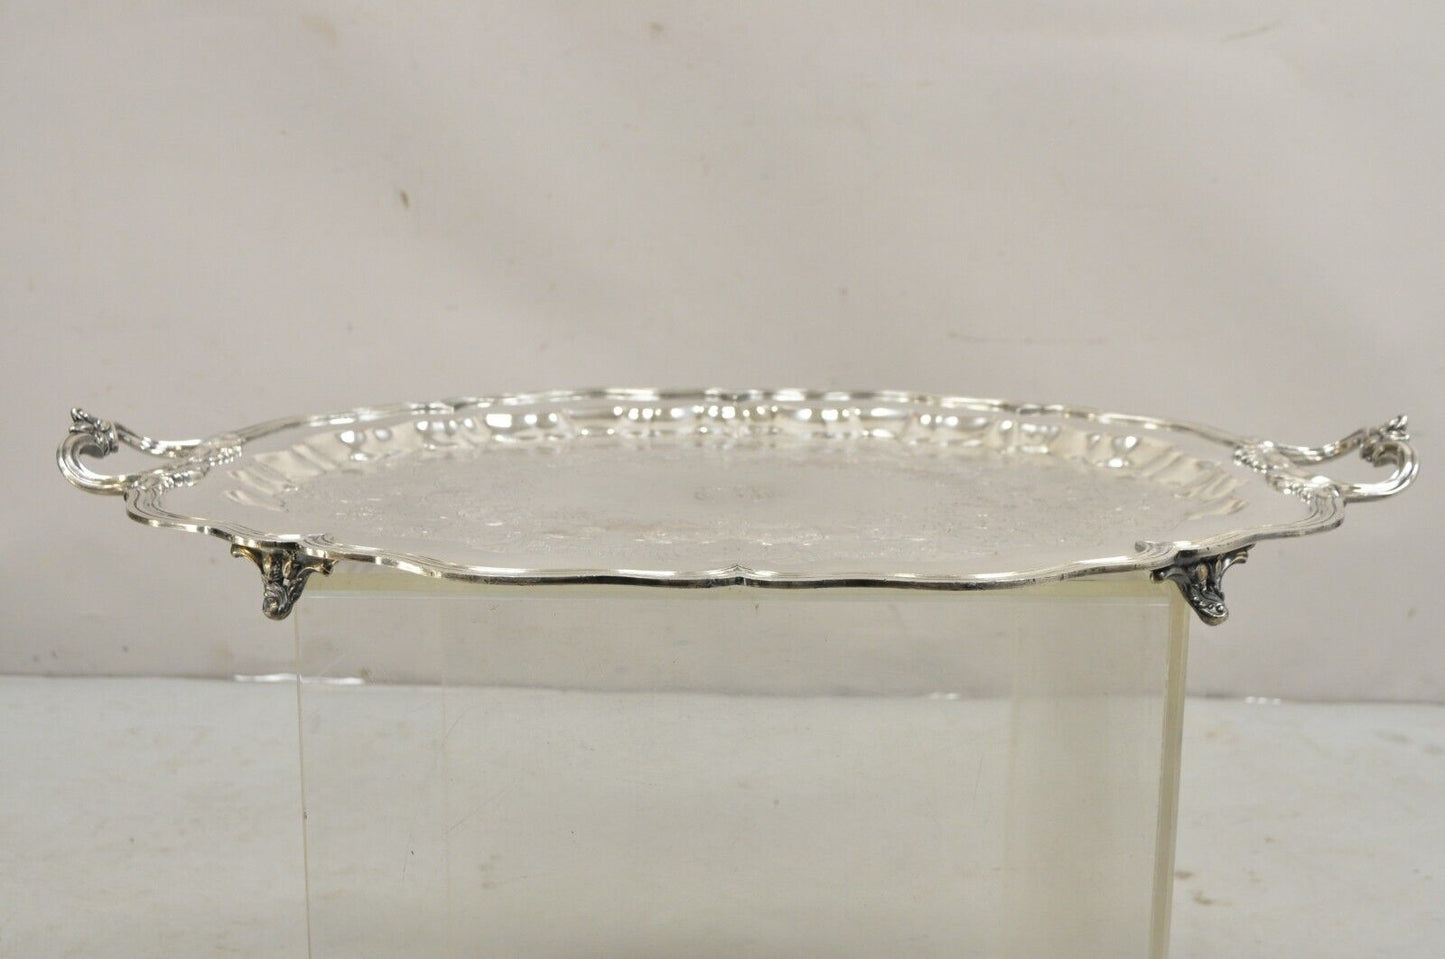 Victorian English Sheffield Silver Plated Oval Scalloped Serving Platter Tray